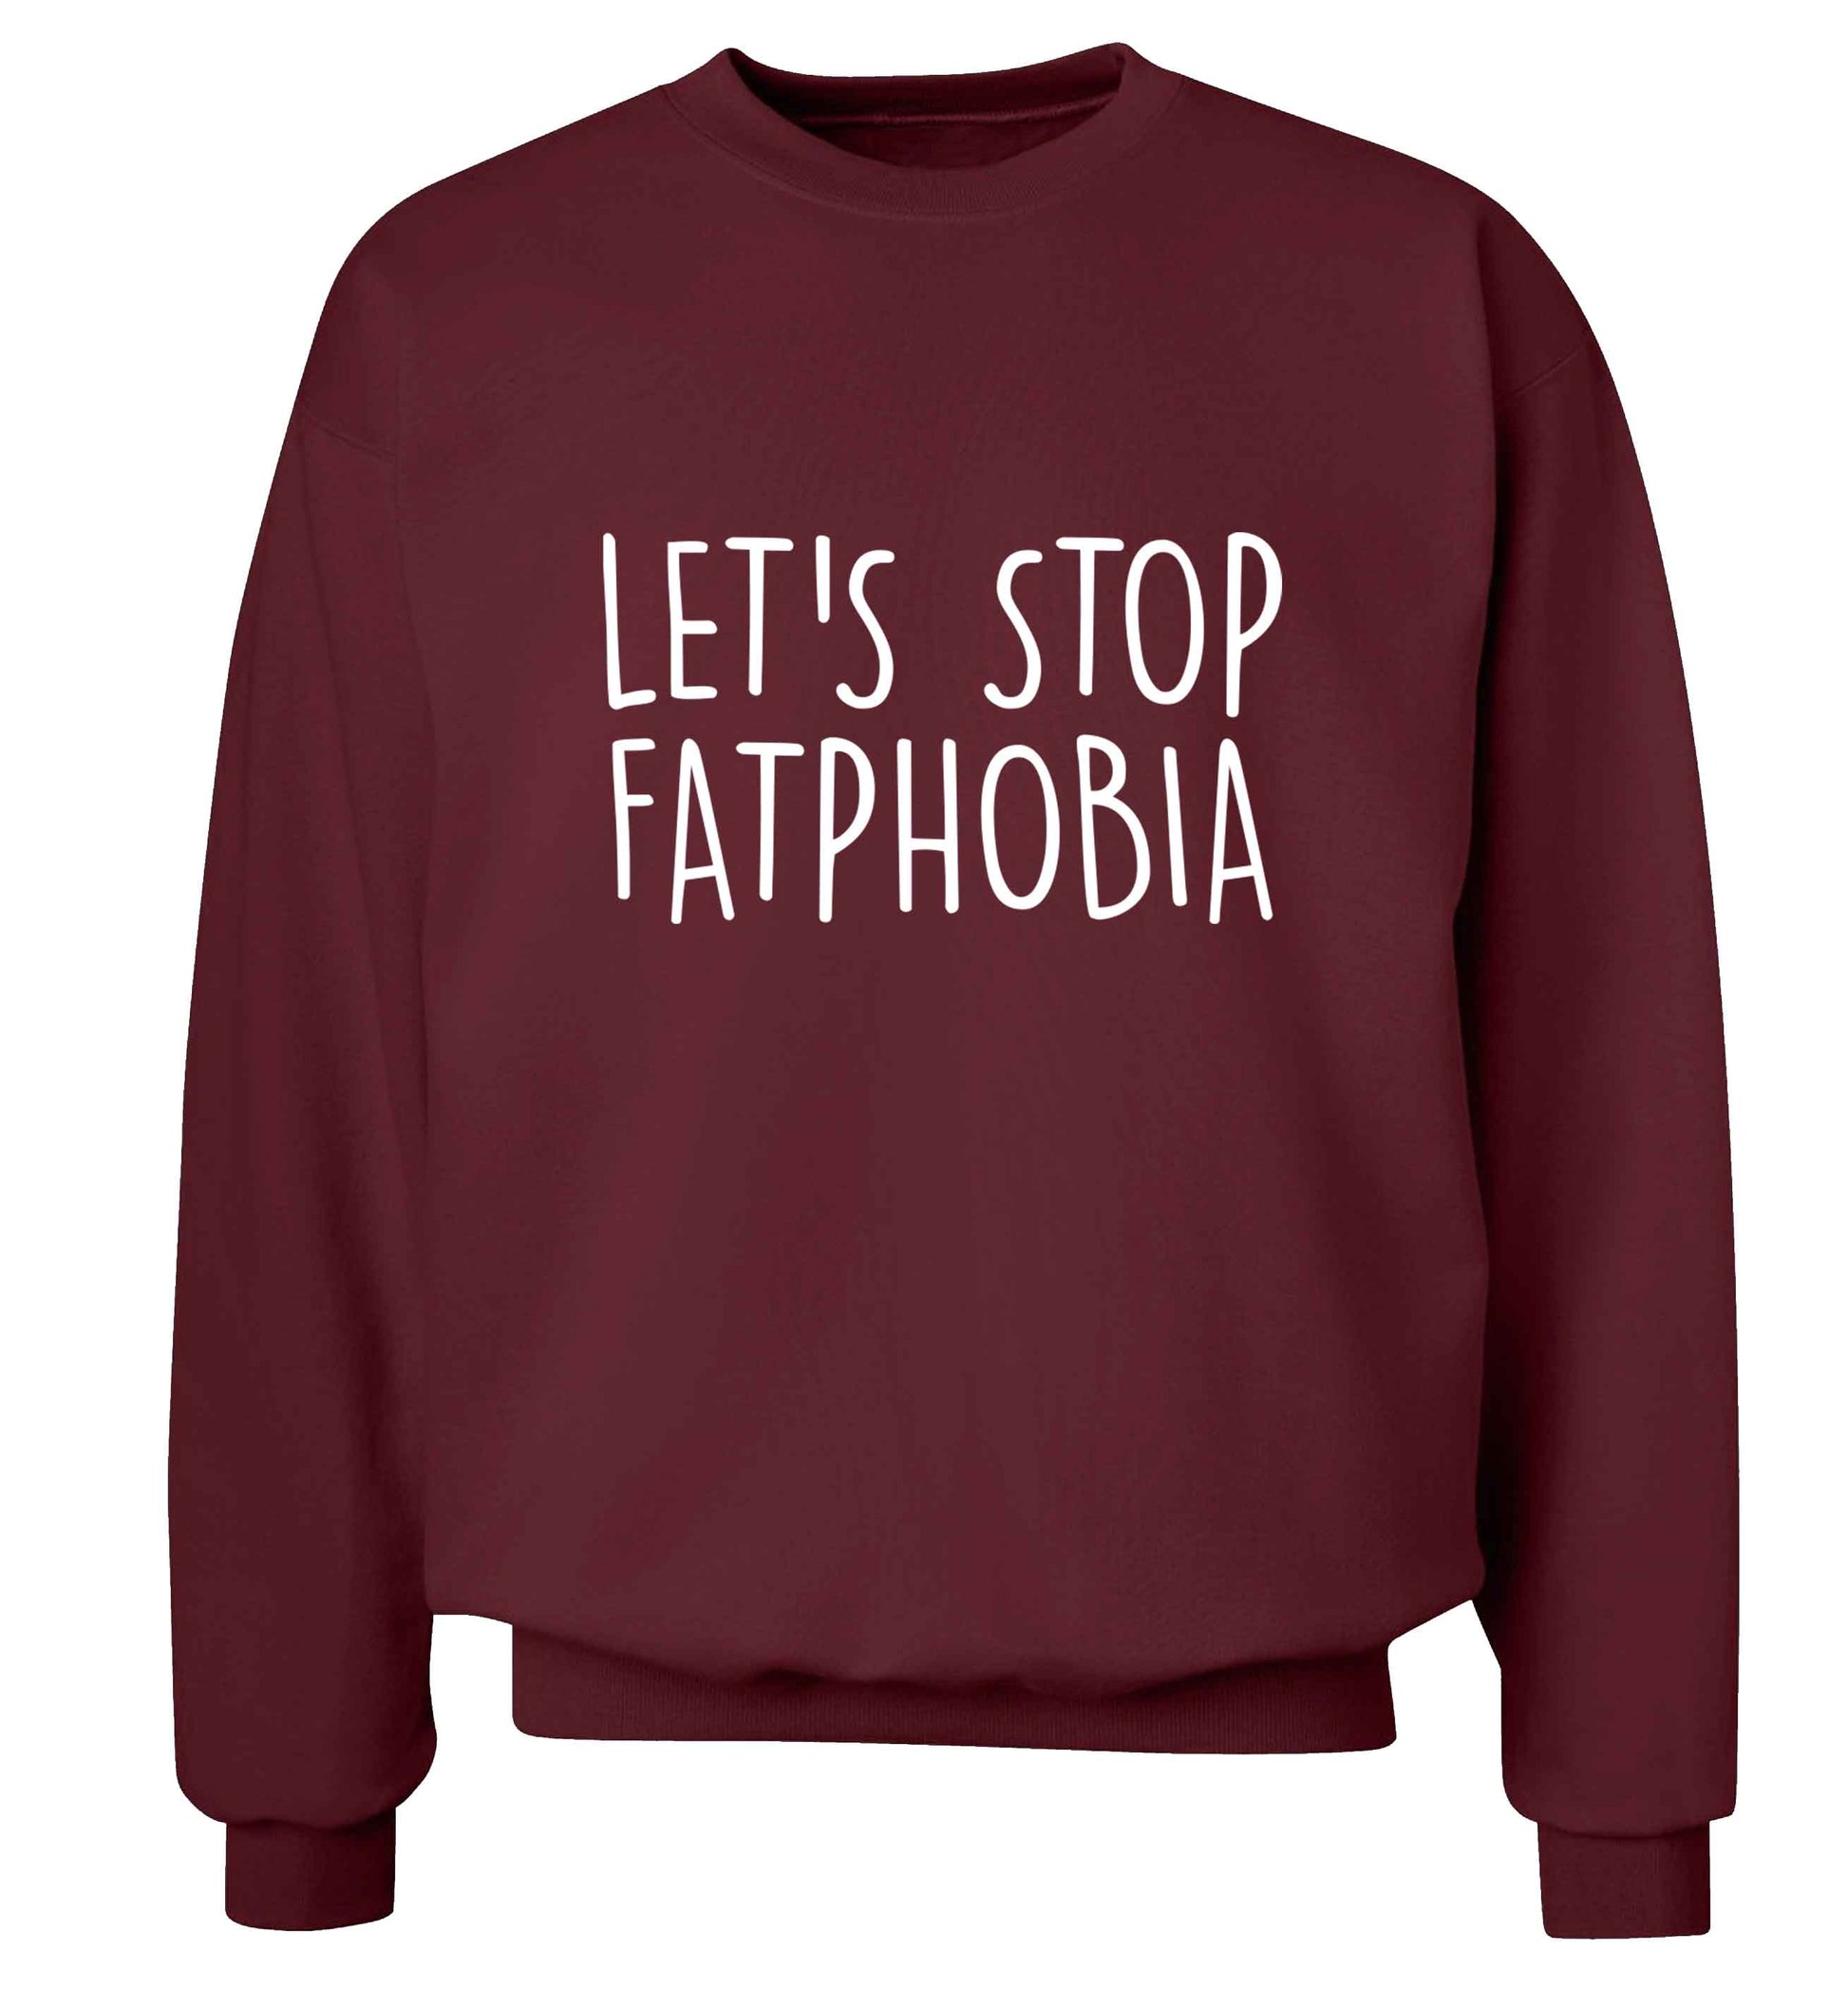 Let's stop fatphobia adult's unisex maroon sweater 2XL